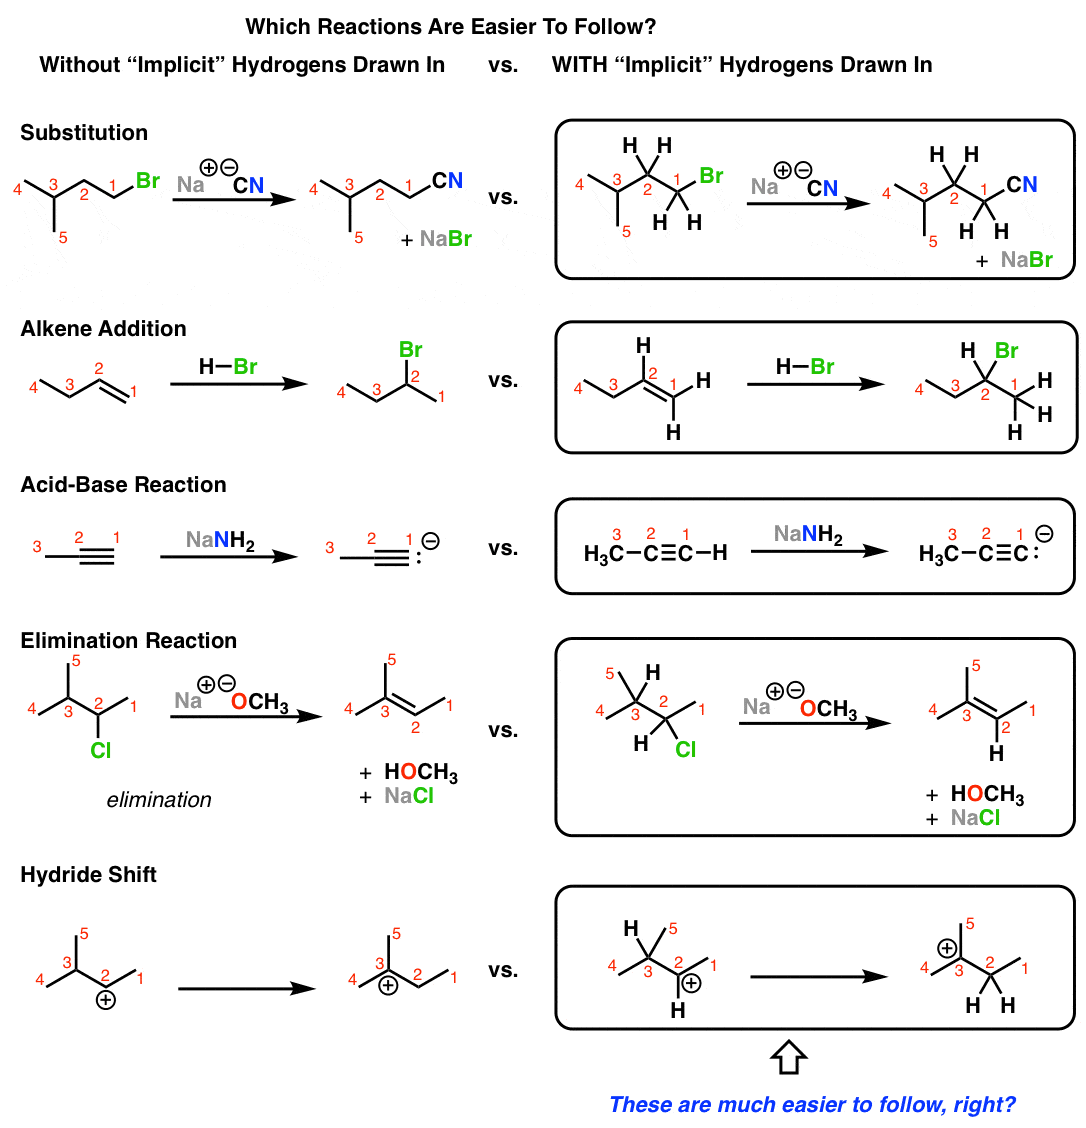 grossmans-rule-is-to-draw-out-hydrogens-near-the-reactive-centers-makes-for-a-much-easier-way-to-visualize-reactions